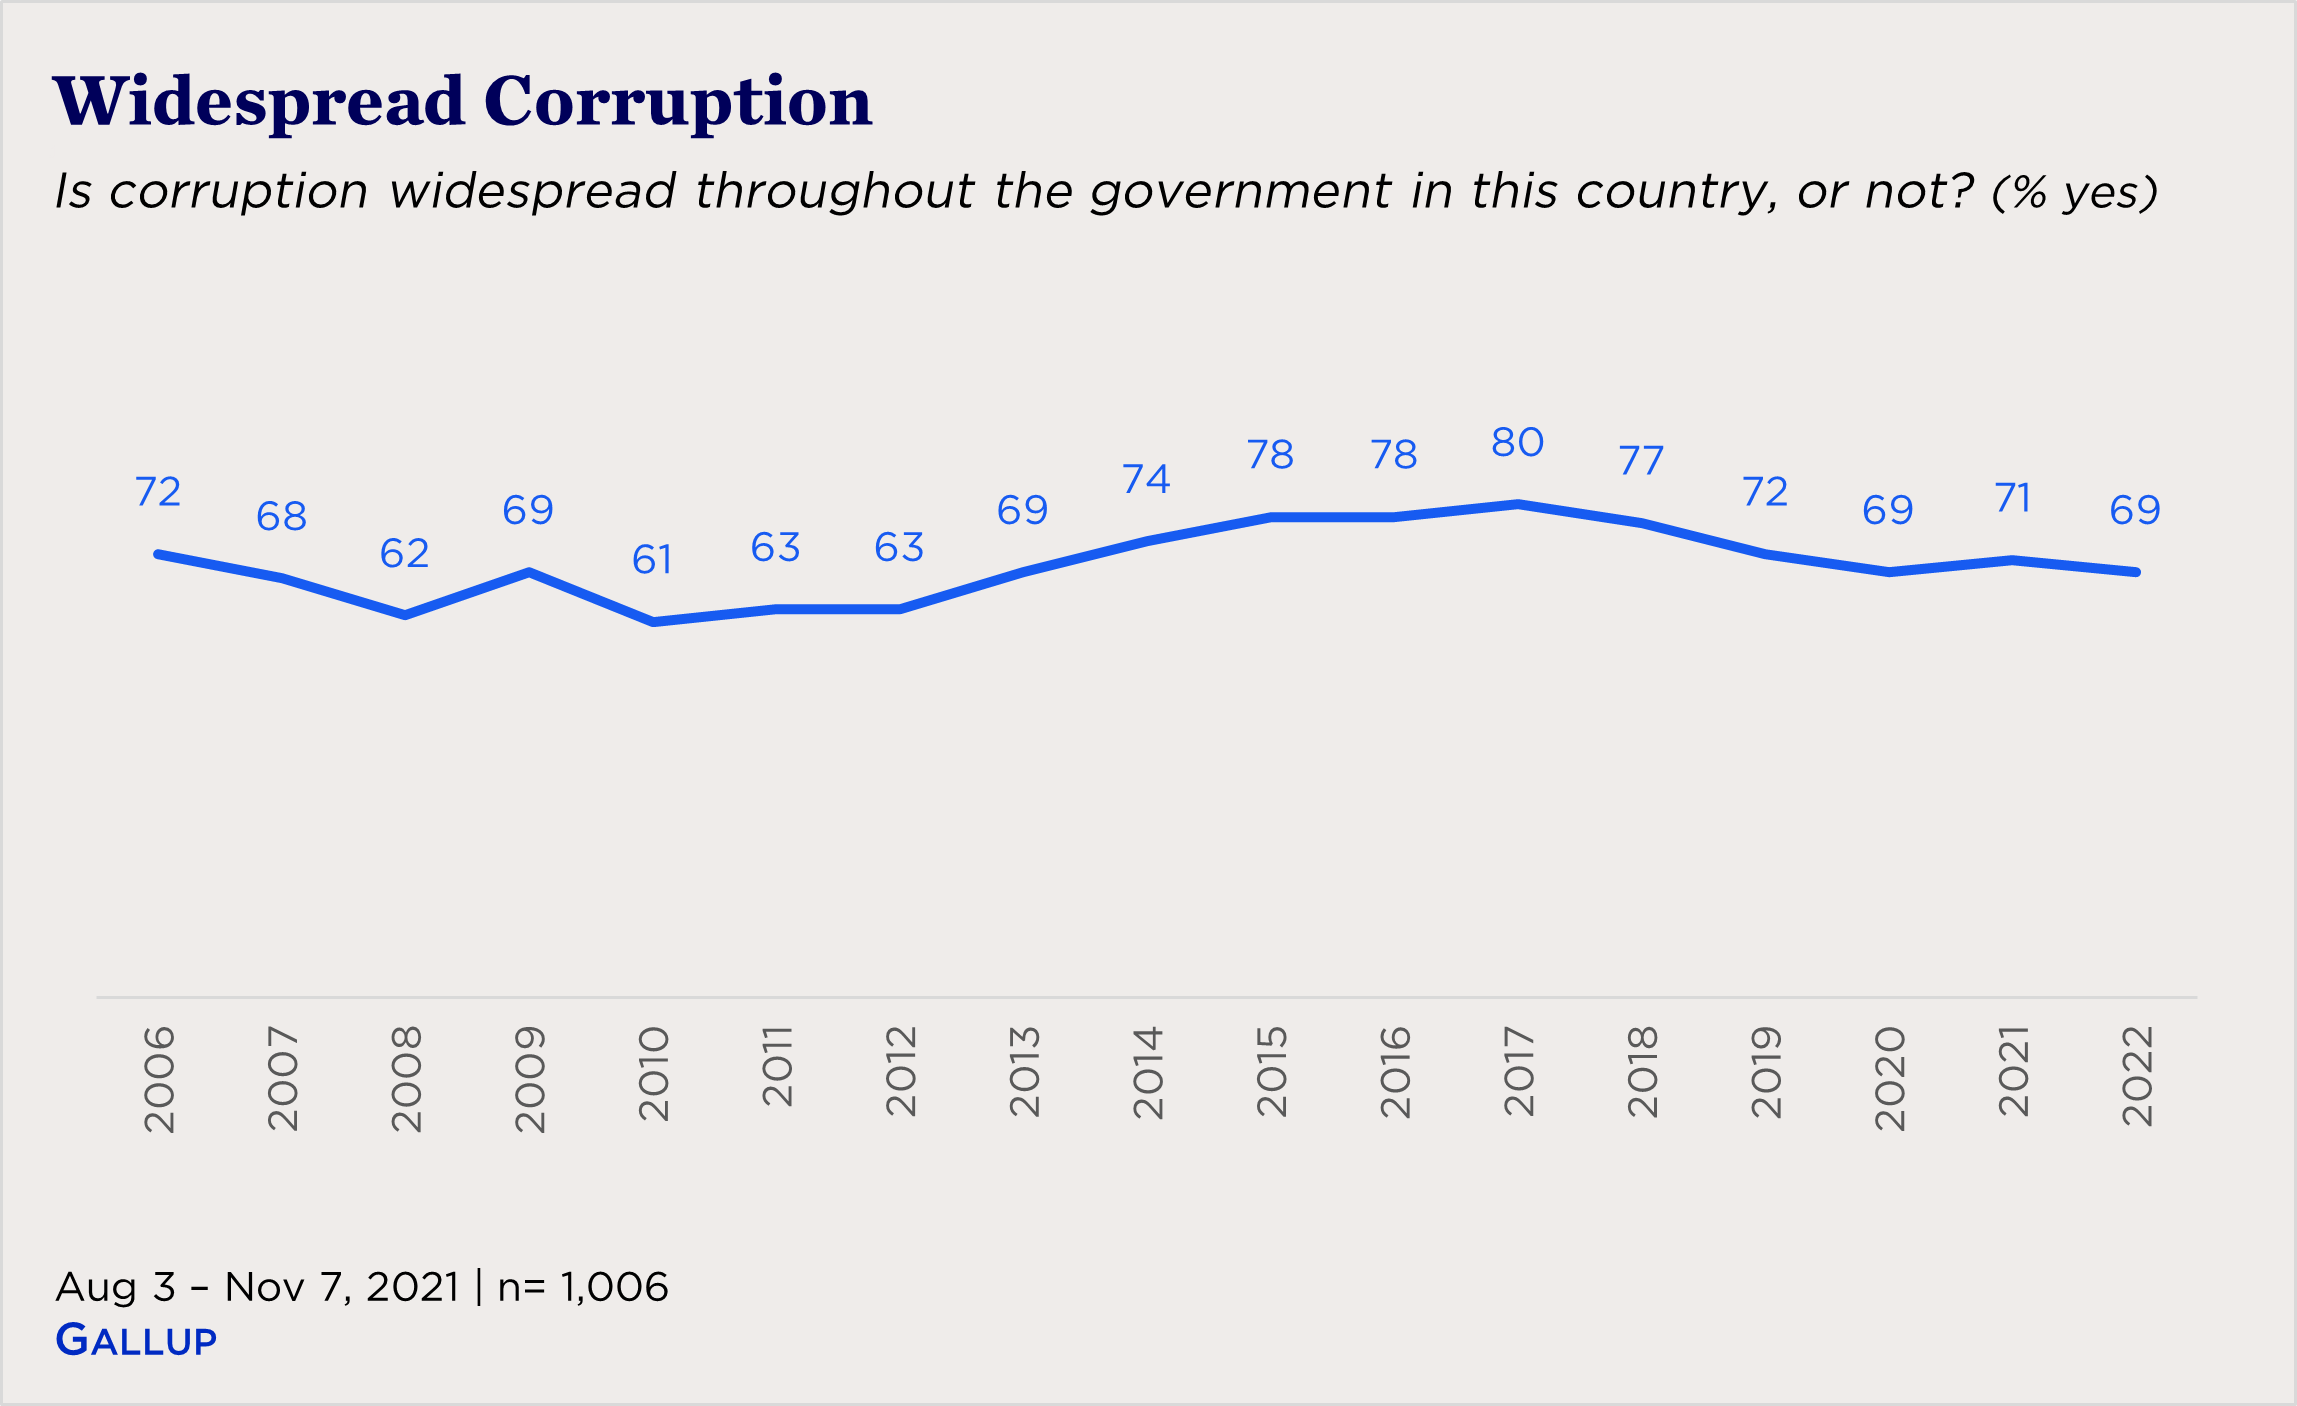 "line chart showing views of corruption"